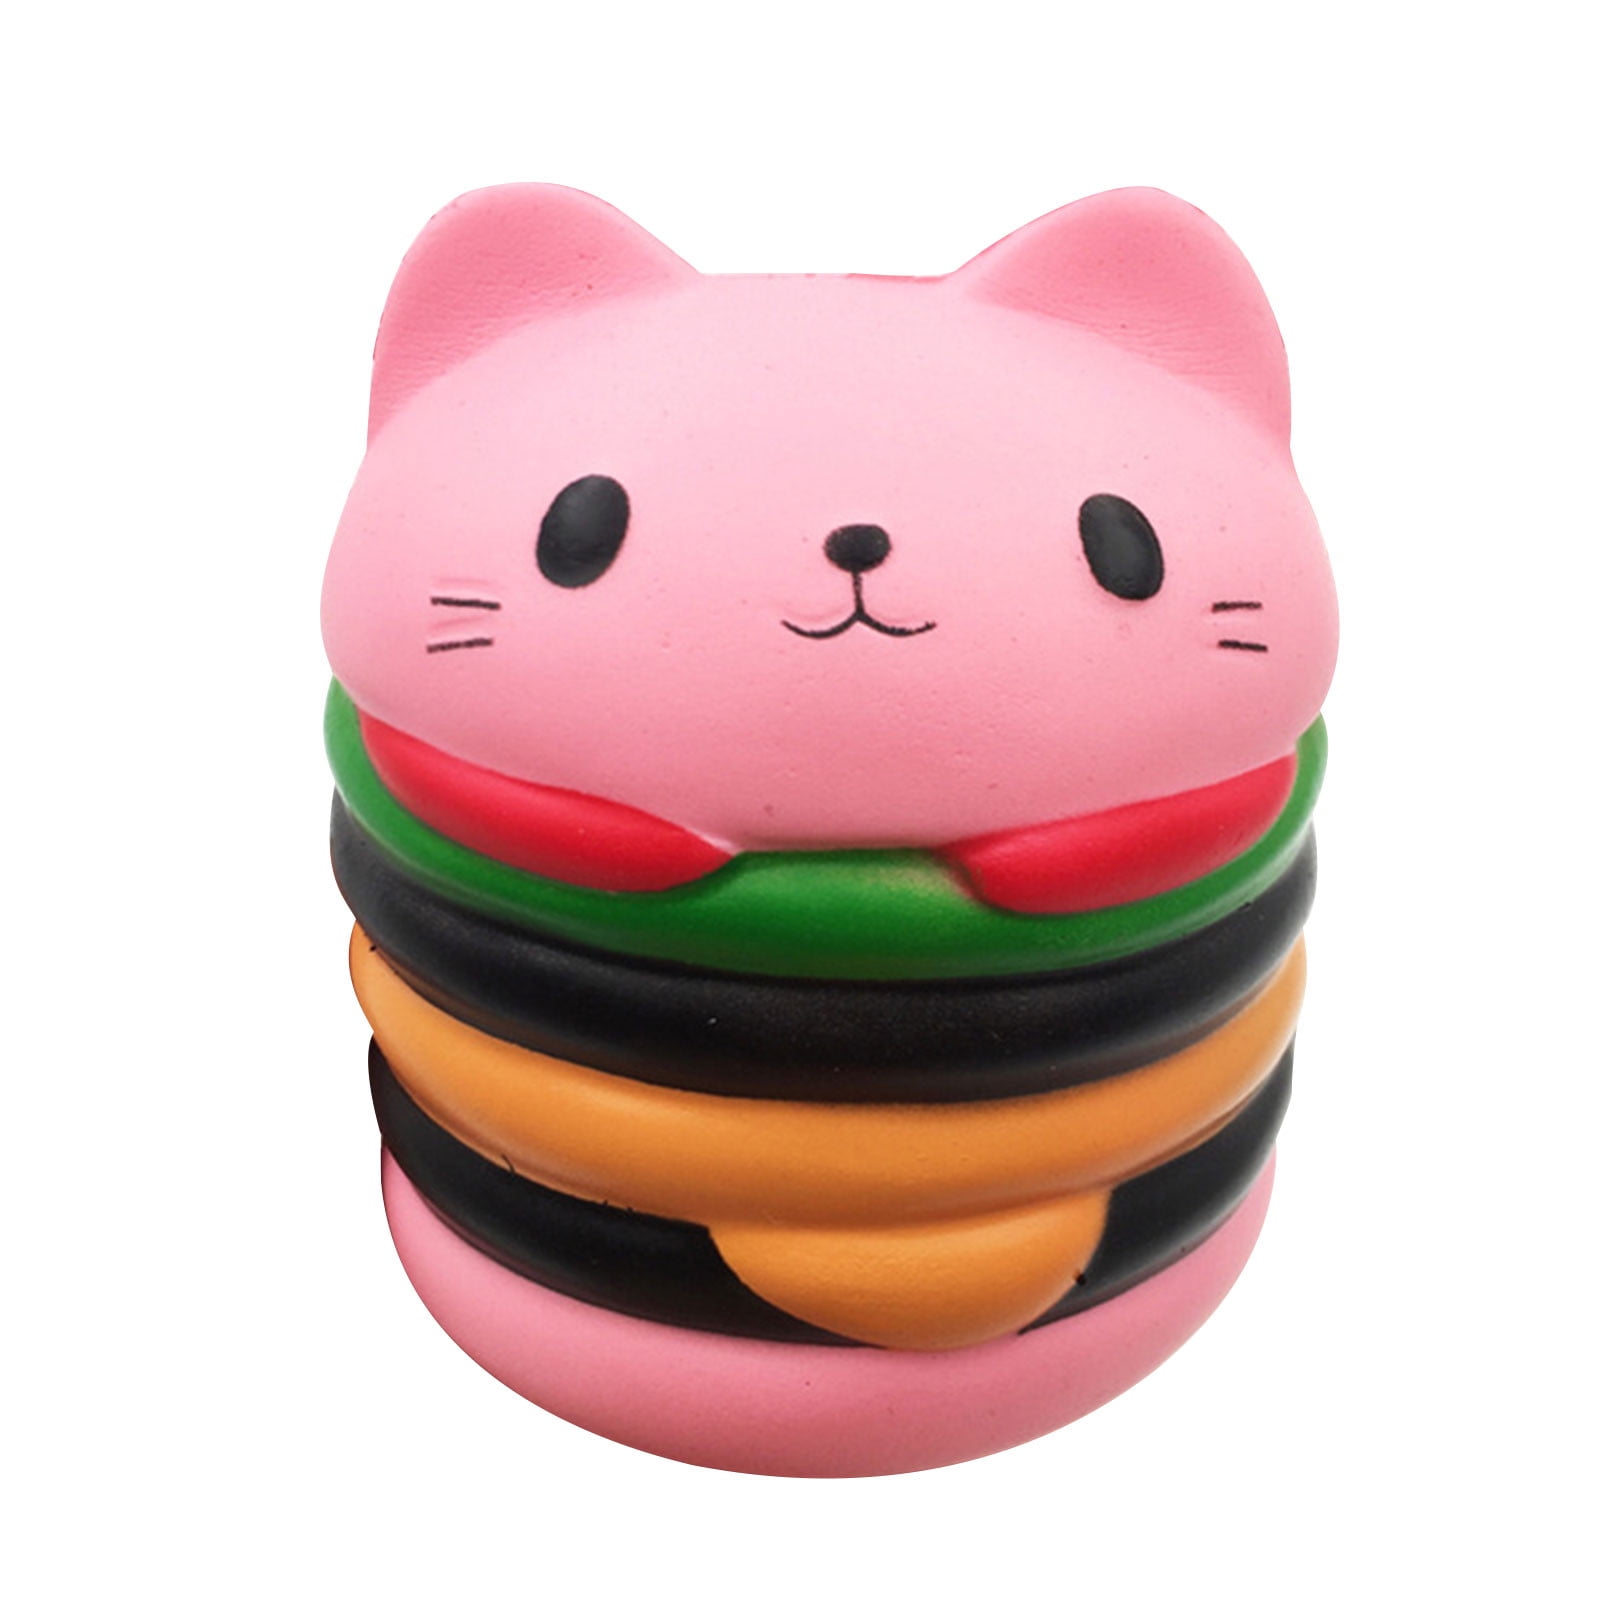 Herrnalise Toy savings up 50% off Cute Squishy Toys Slow Rising Collection Gift Stress Reliever Cat Burger Squishy Squeezables Pink - Walmart.com